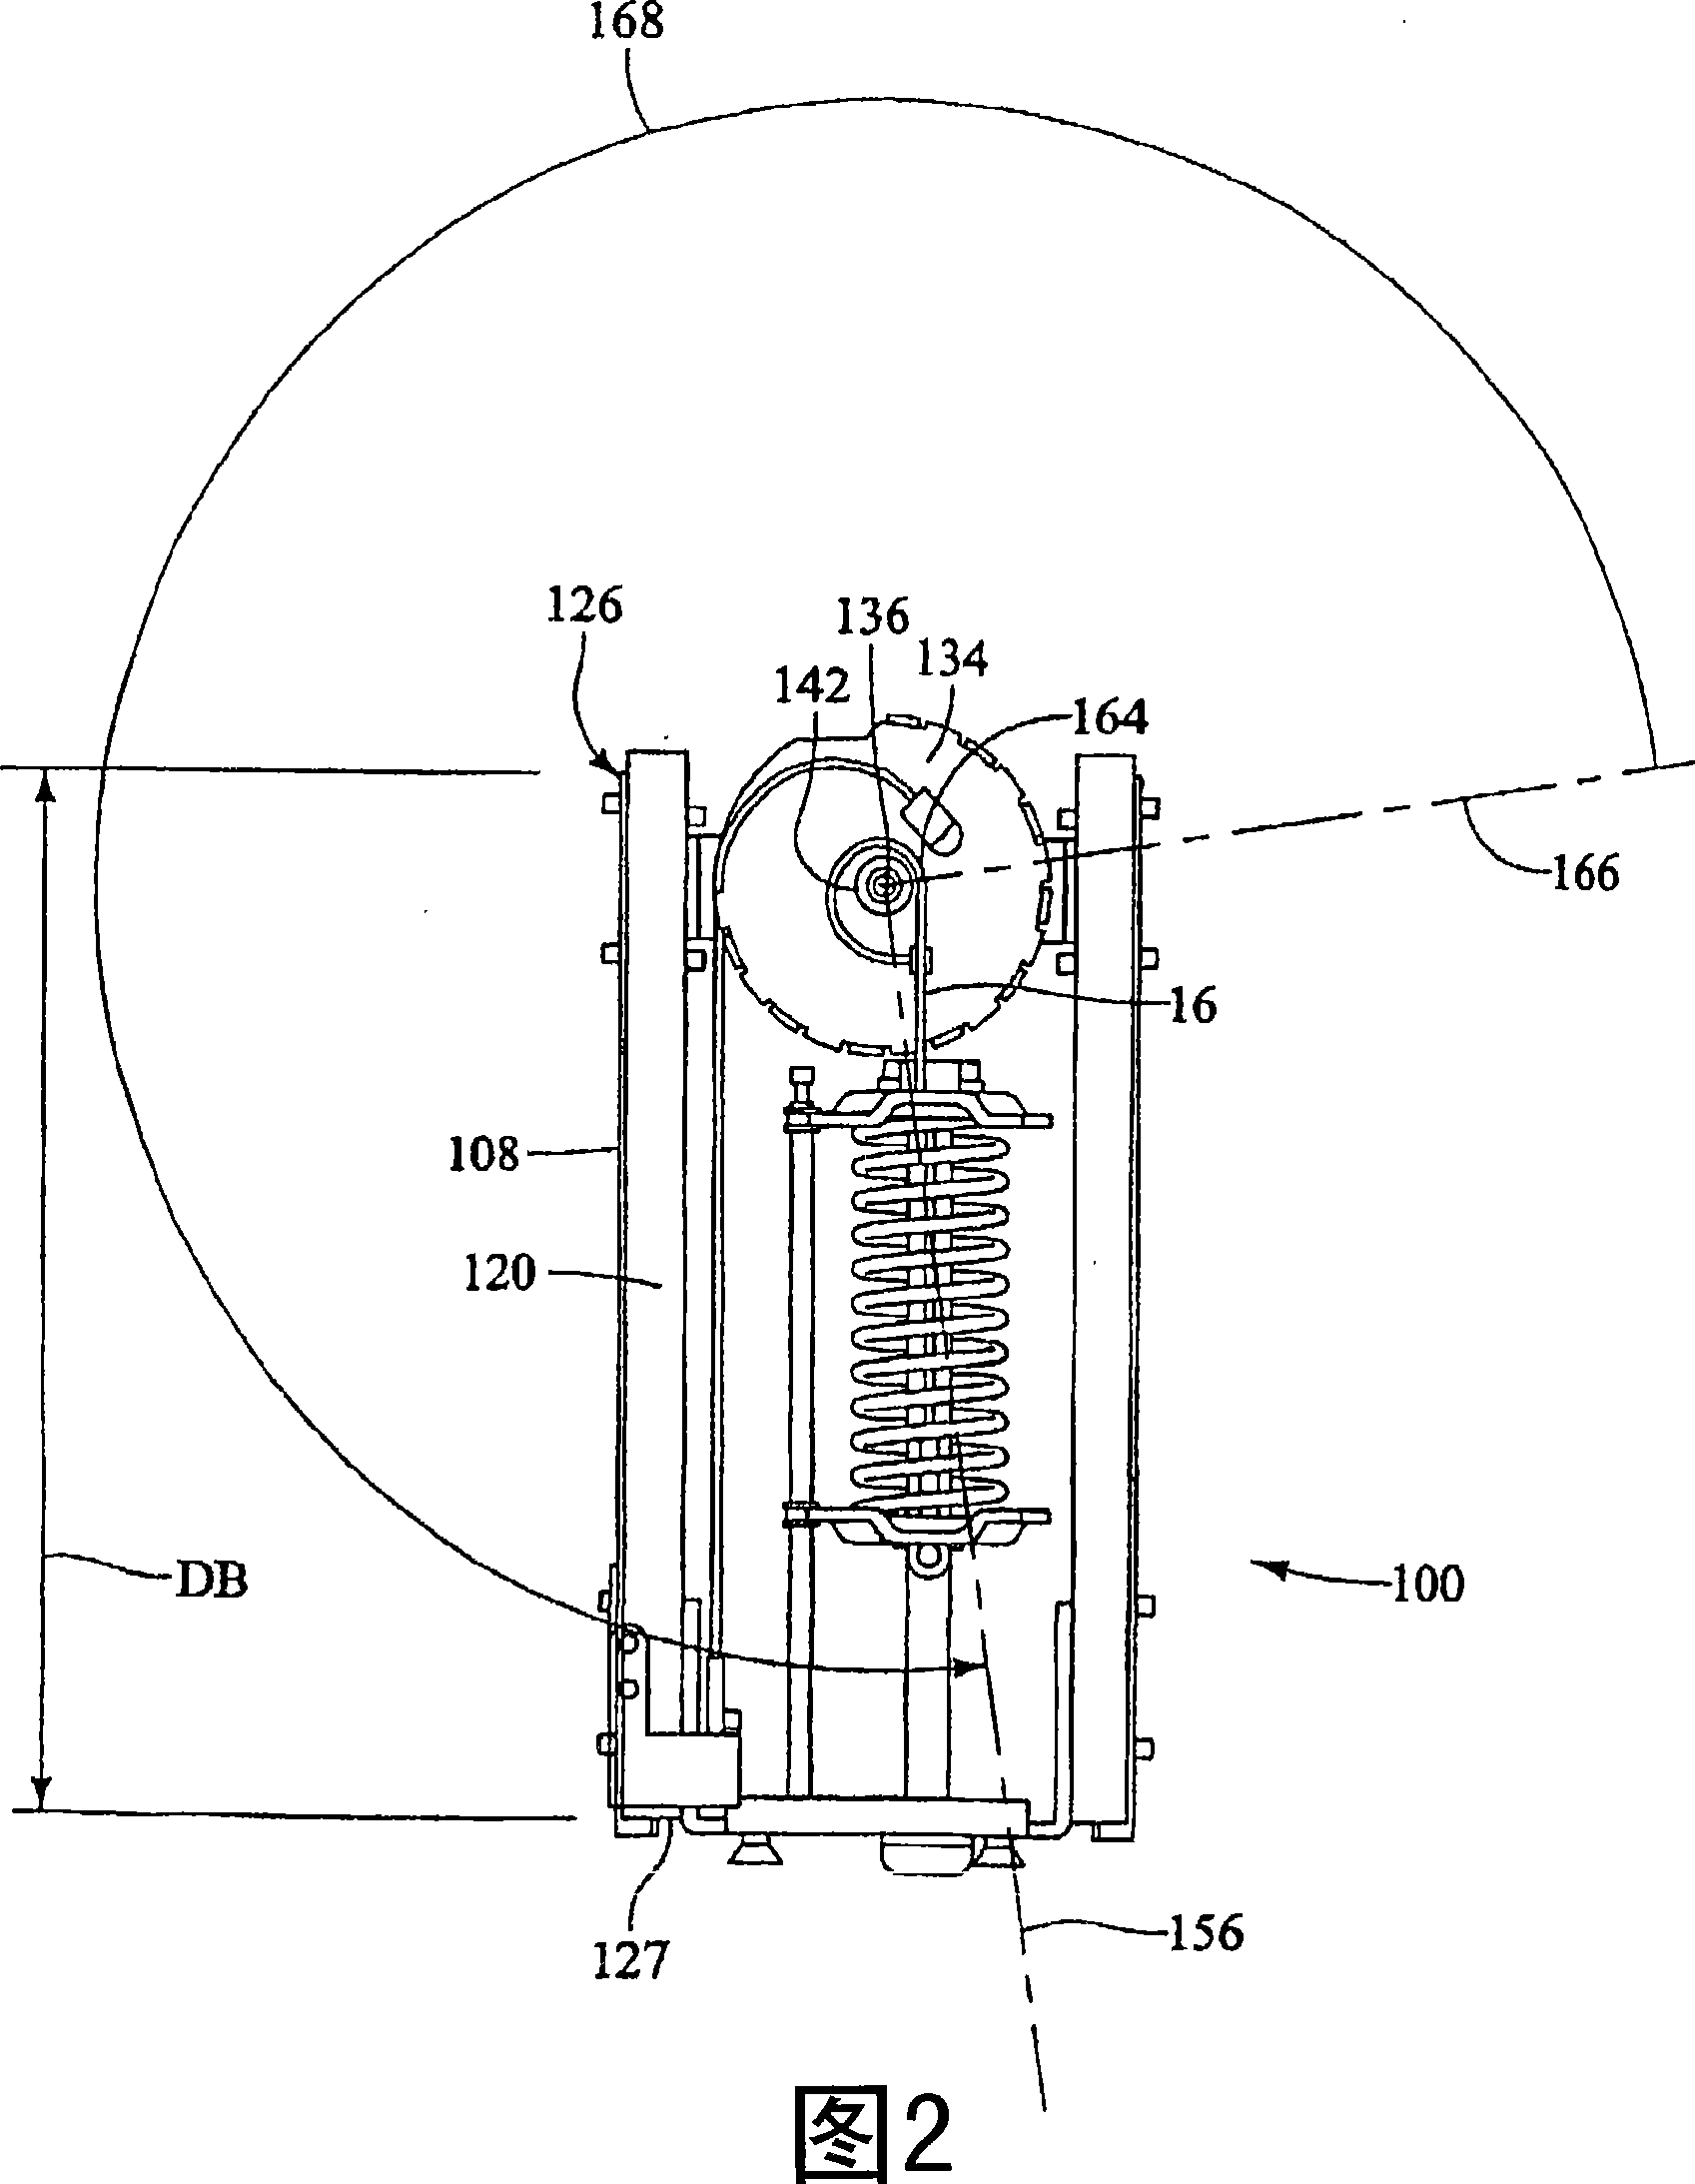 Lift mechanism systems and methods